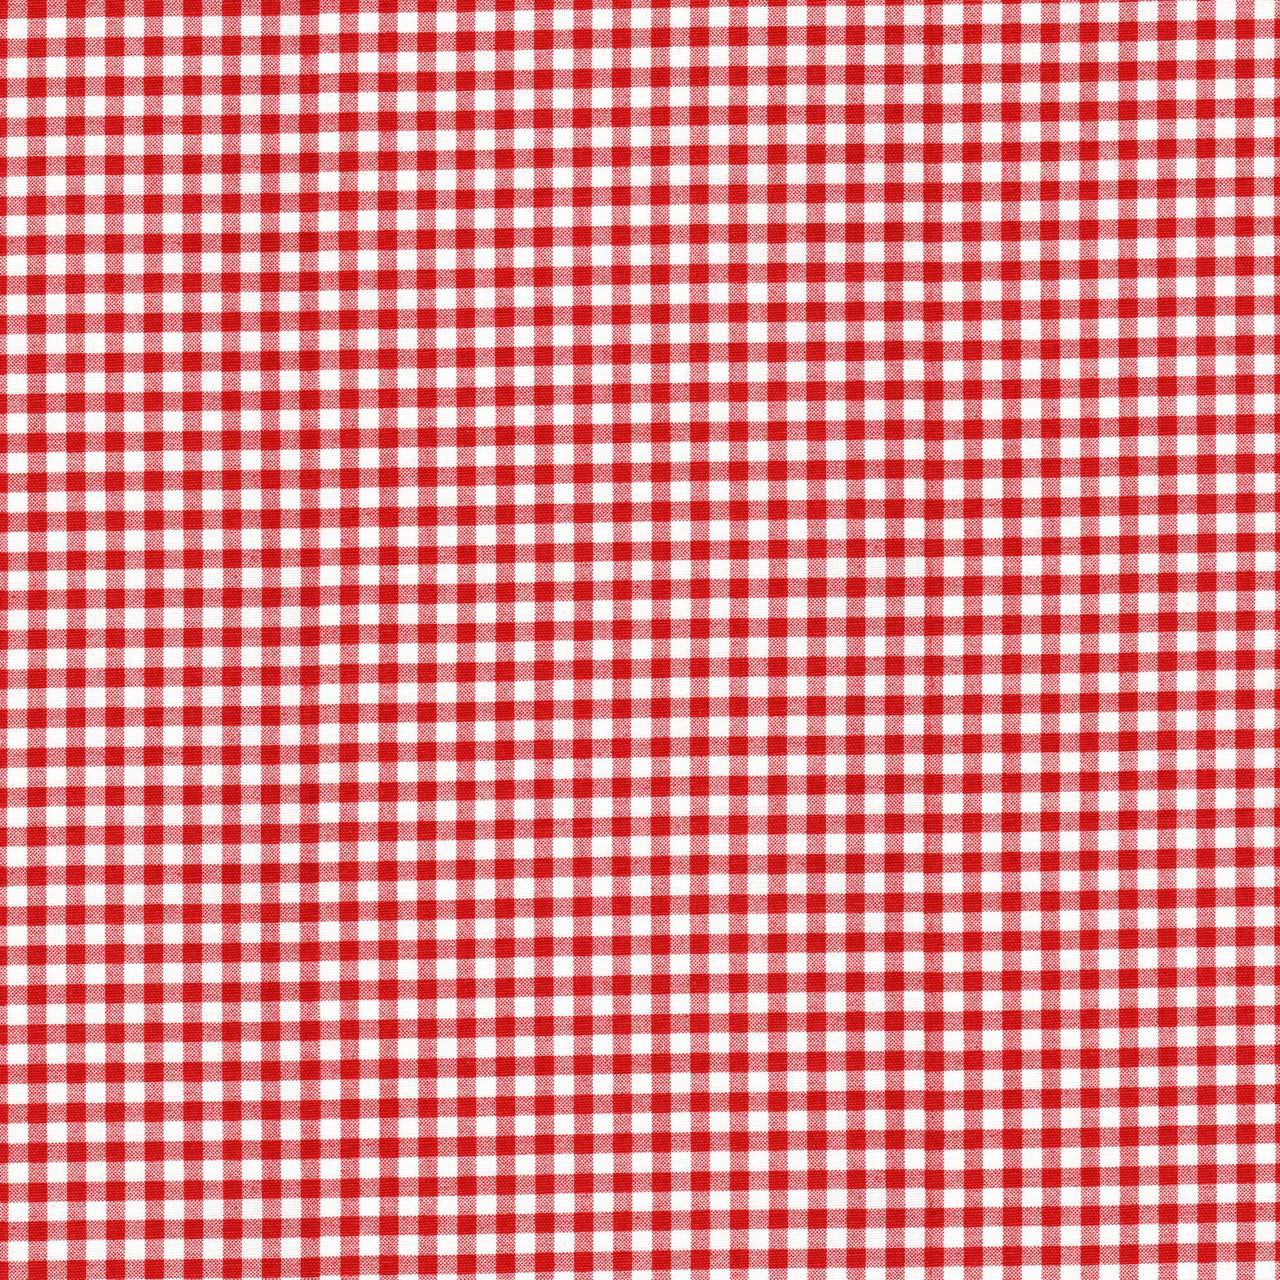 Rod Pocket Curtains in Lipstick Red Large Gingham Check on White